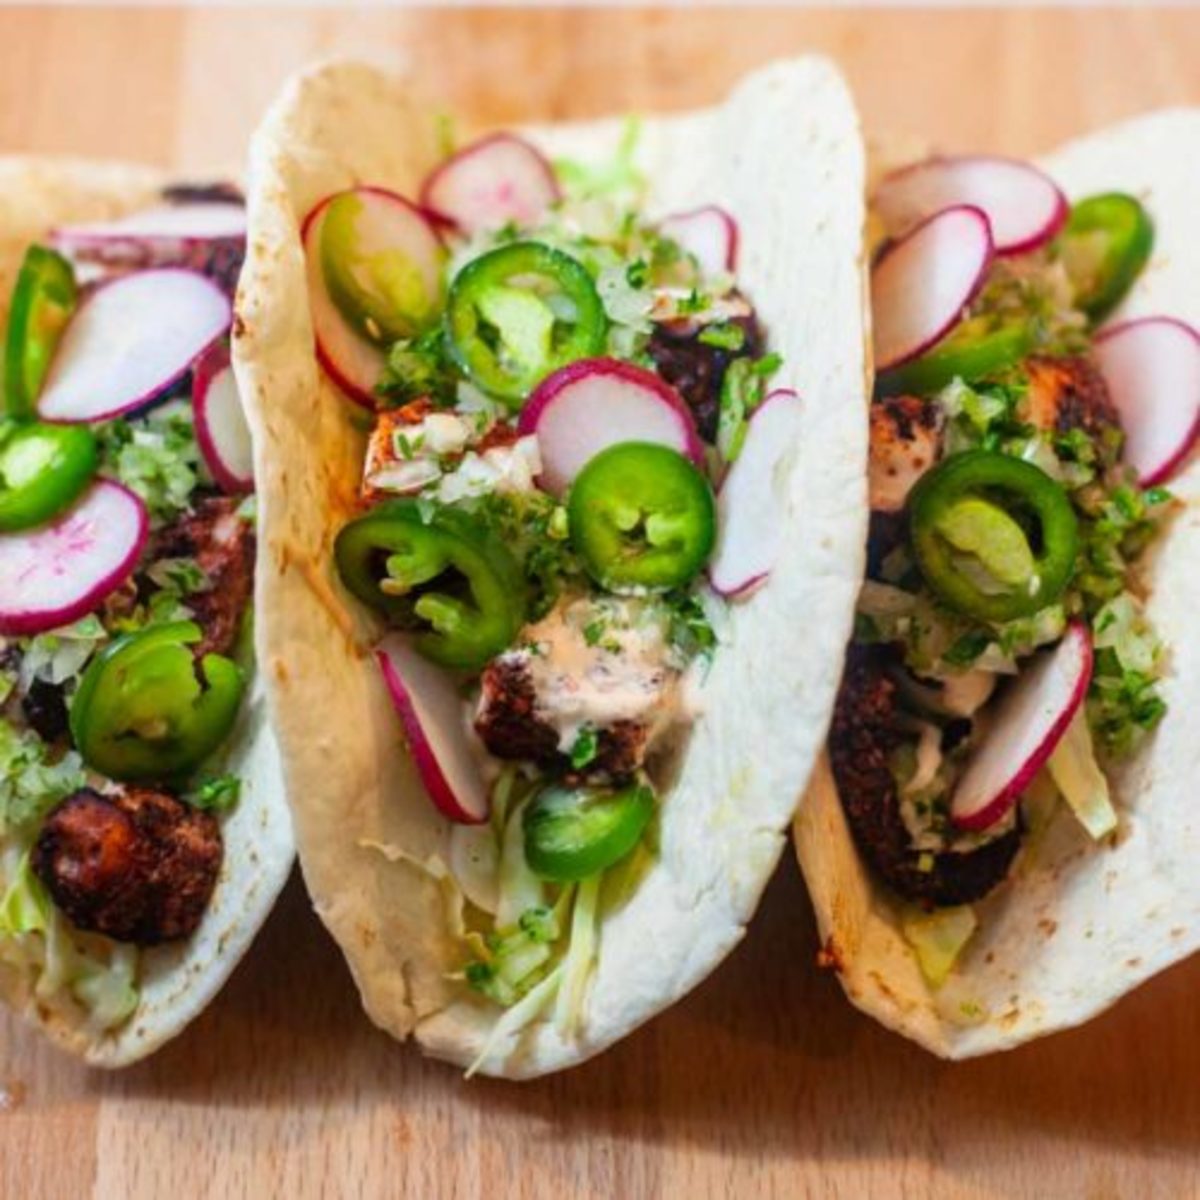 Octopus Tacos Recipes for Lunch